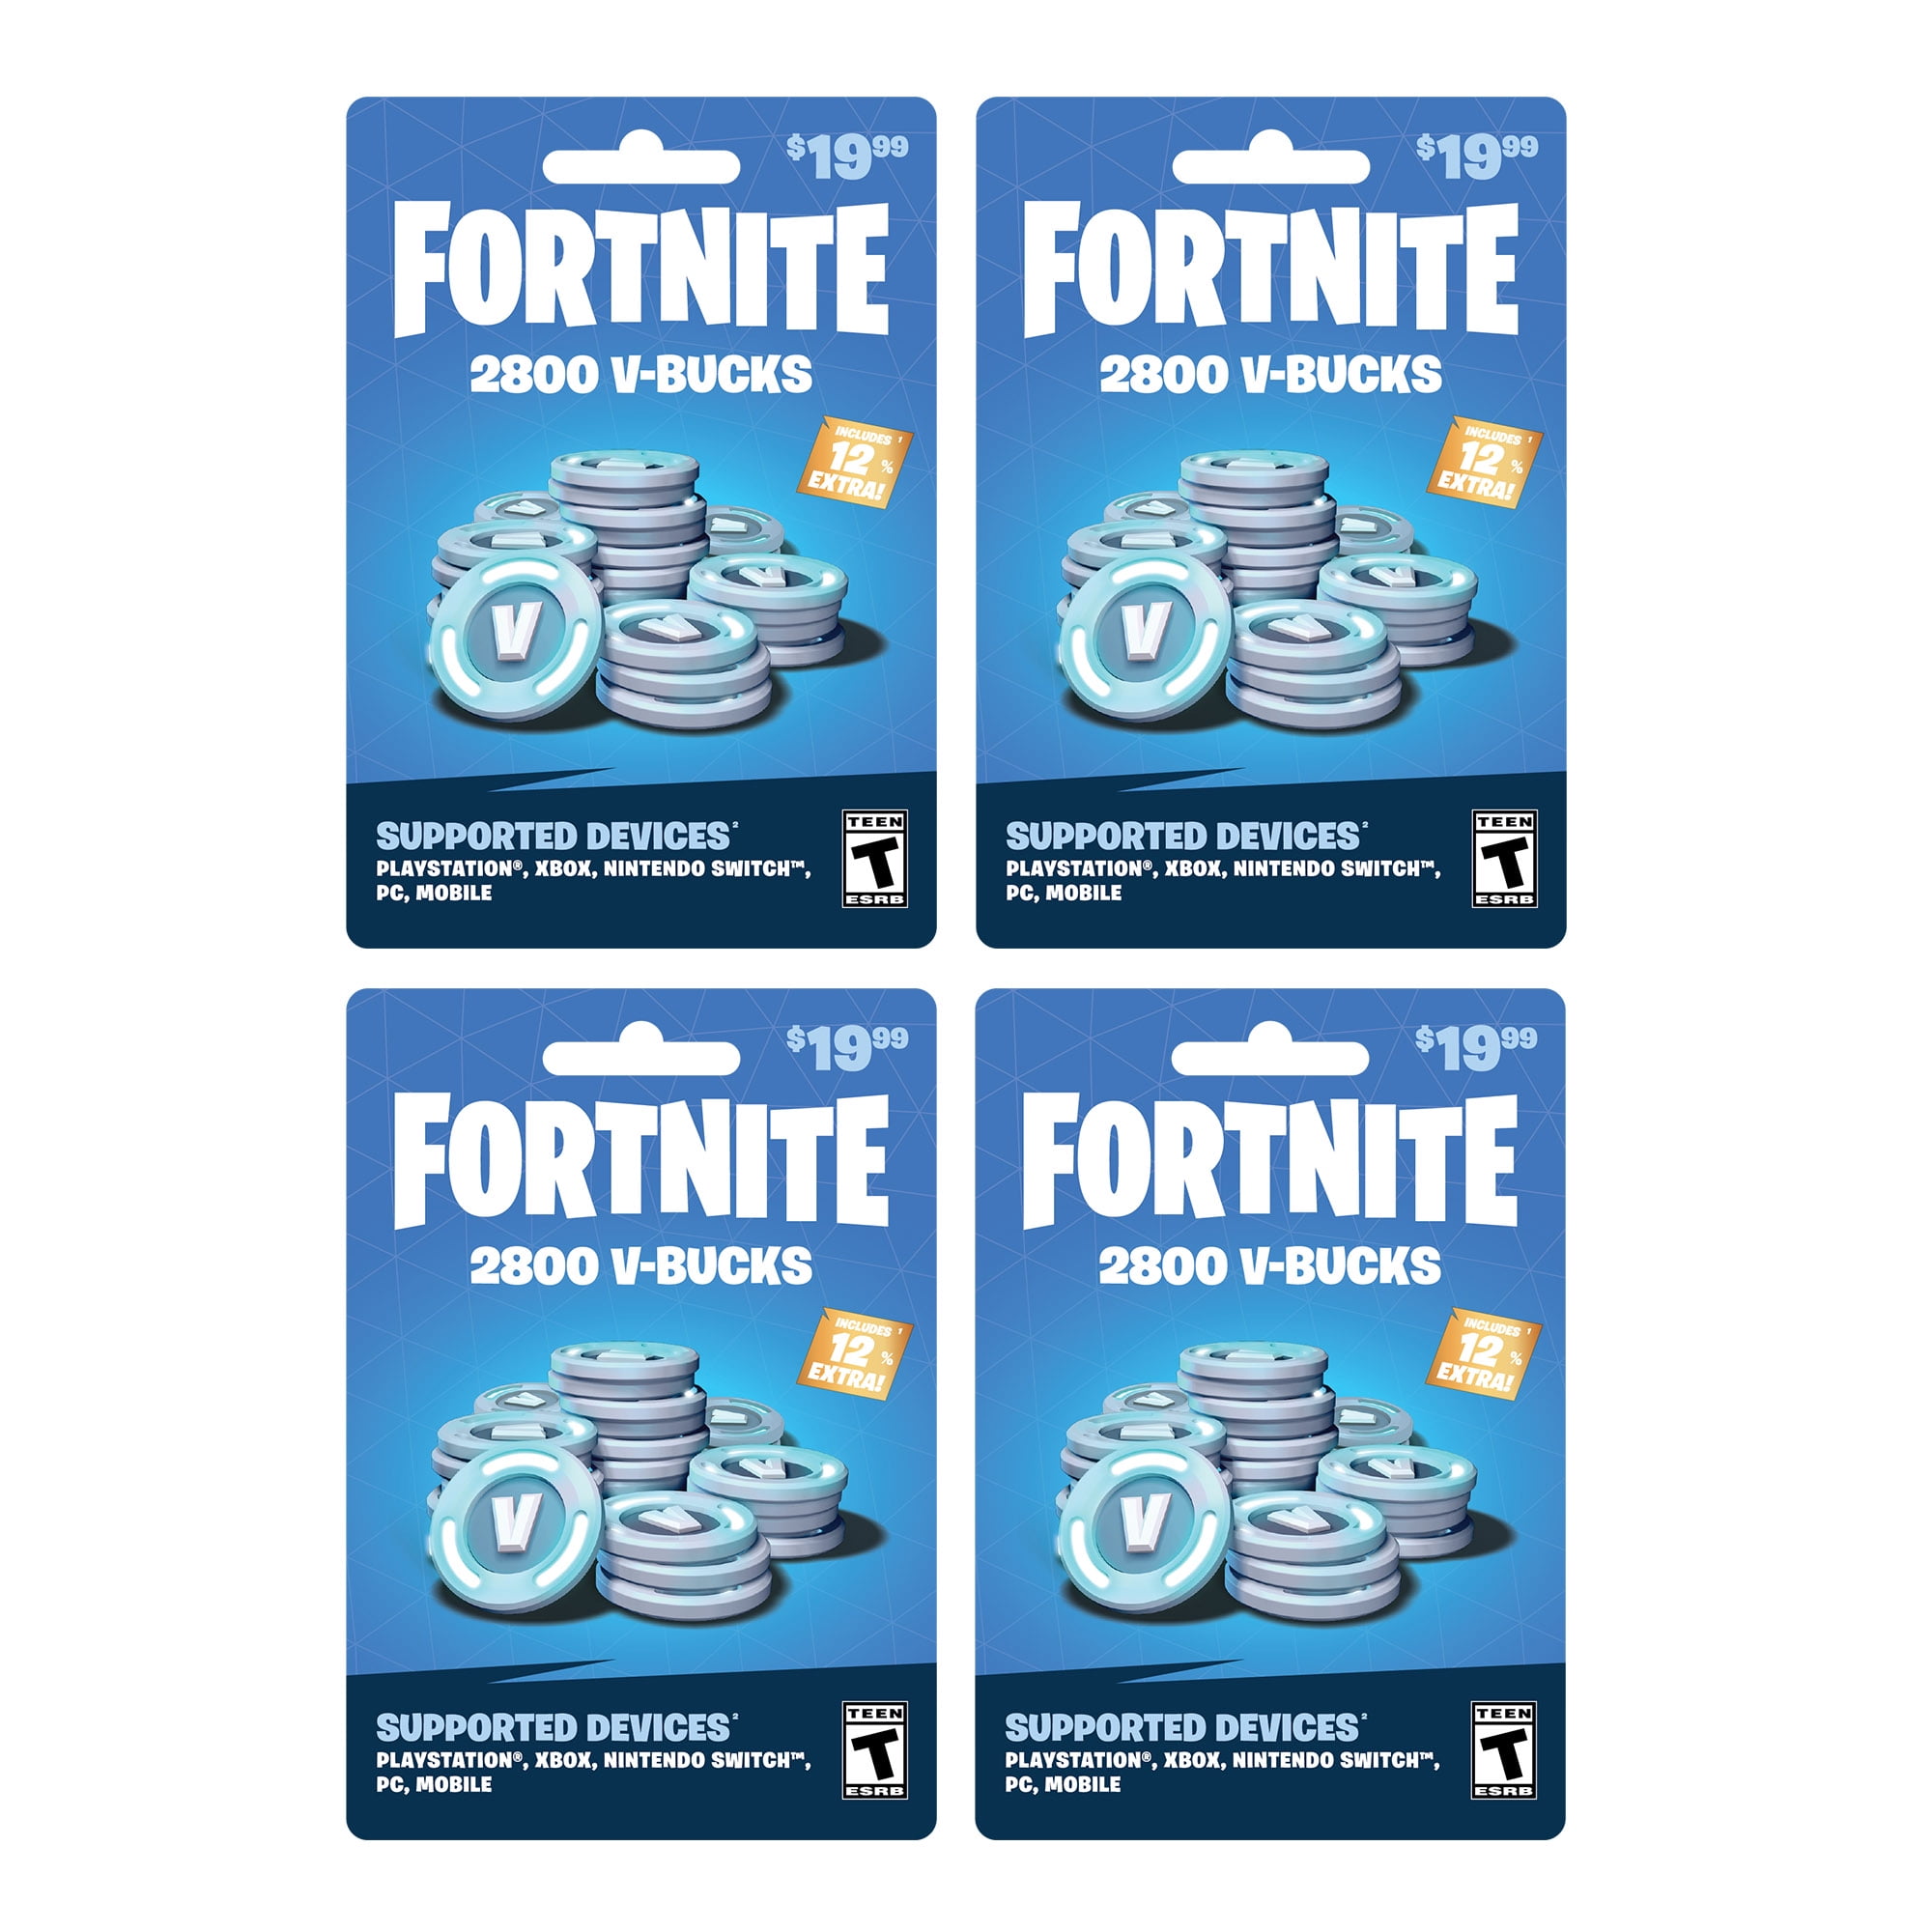 Fortnite 11,200 V-Bucks, (4 x $19.99 Cards) $79.96 Physical Cards, Gearbox